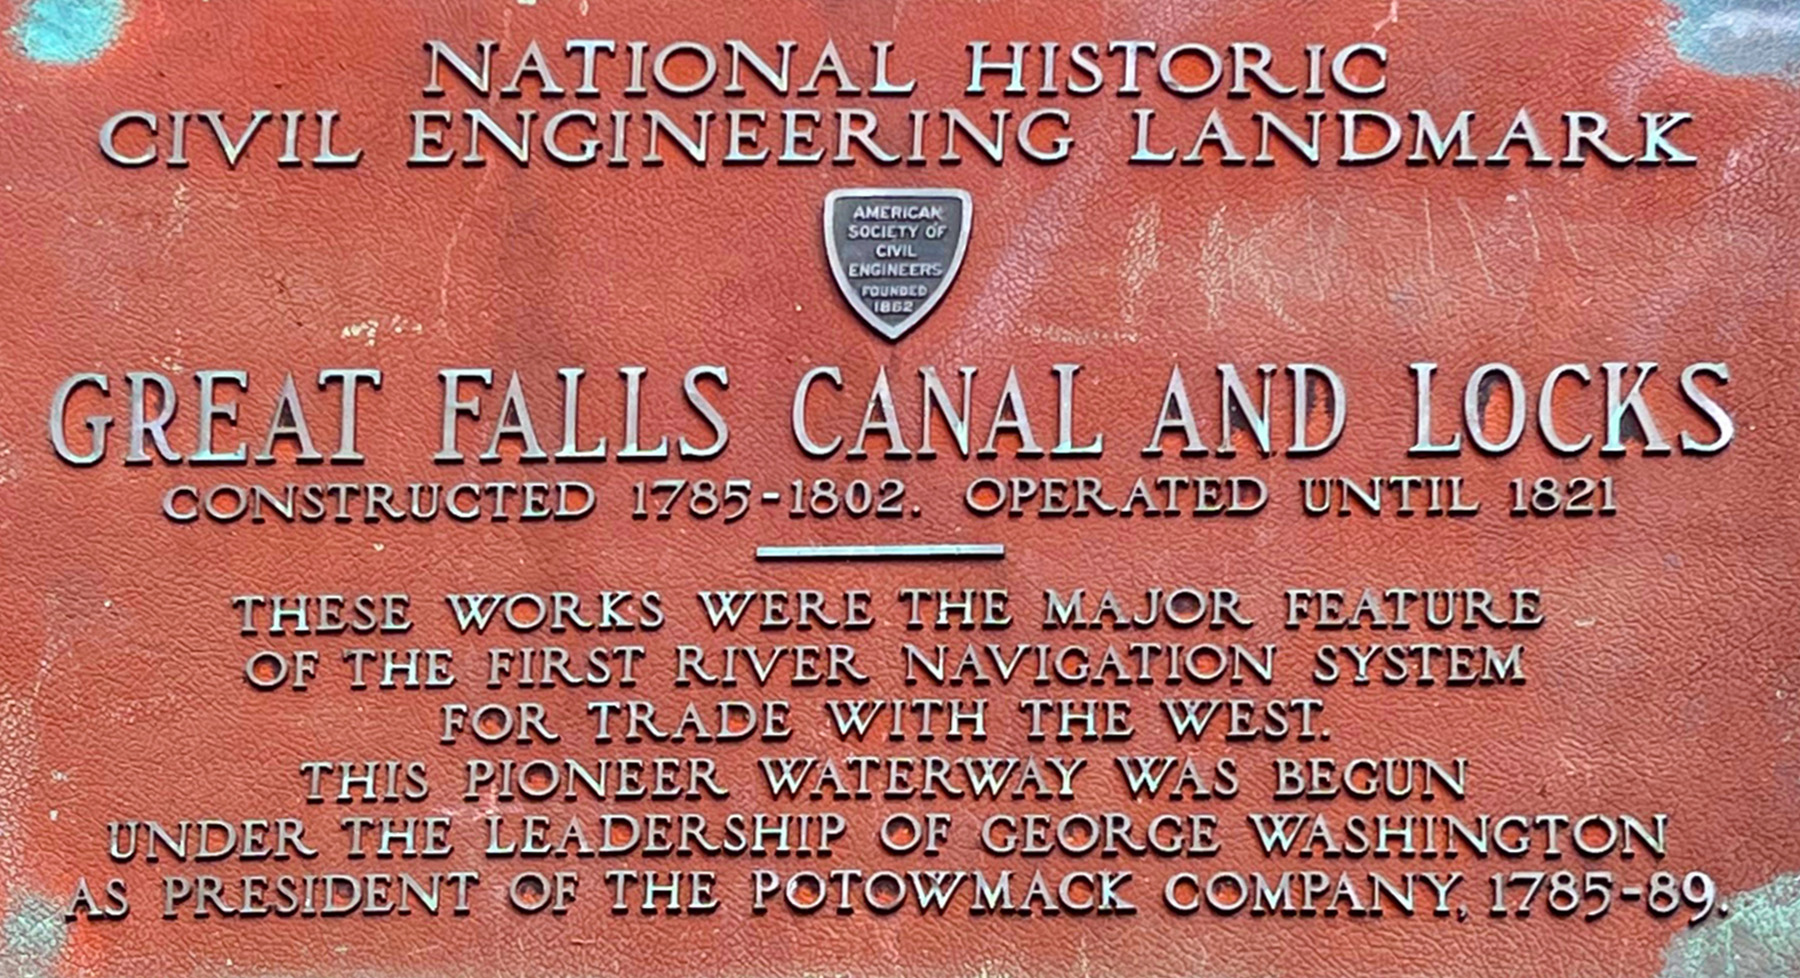 A plaque denoting the historic civil engineering landmark status of the Great Falls Canals and Locks. 